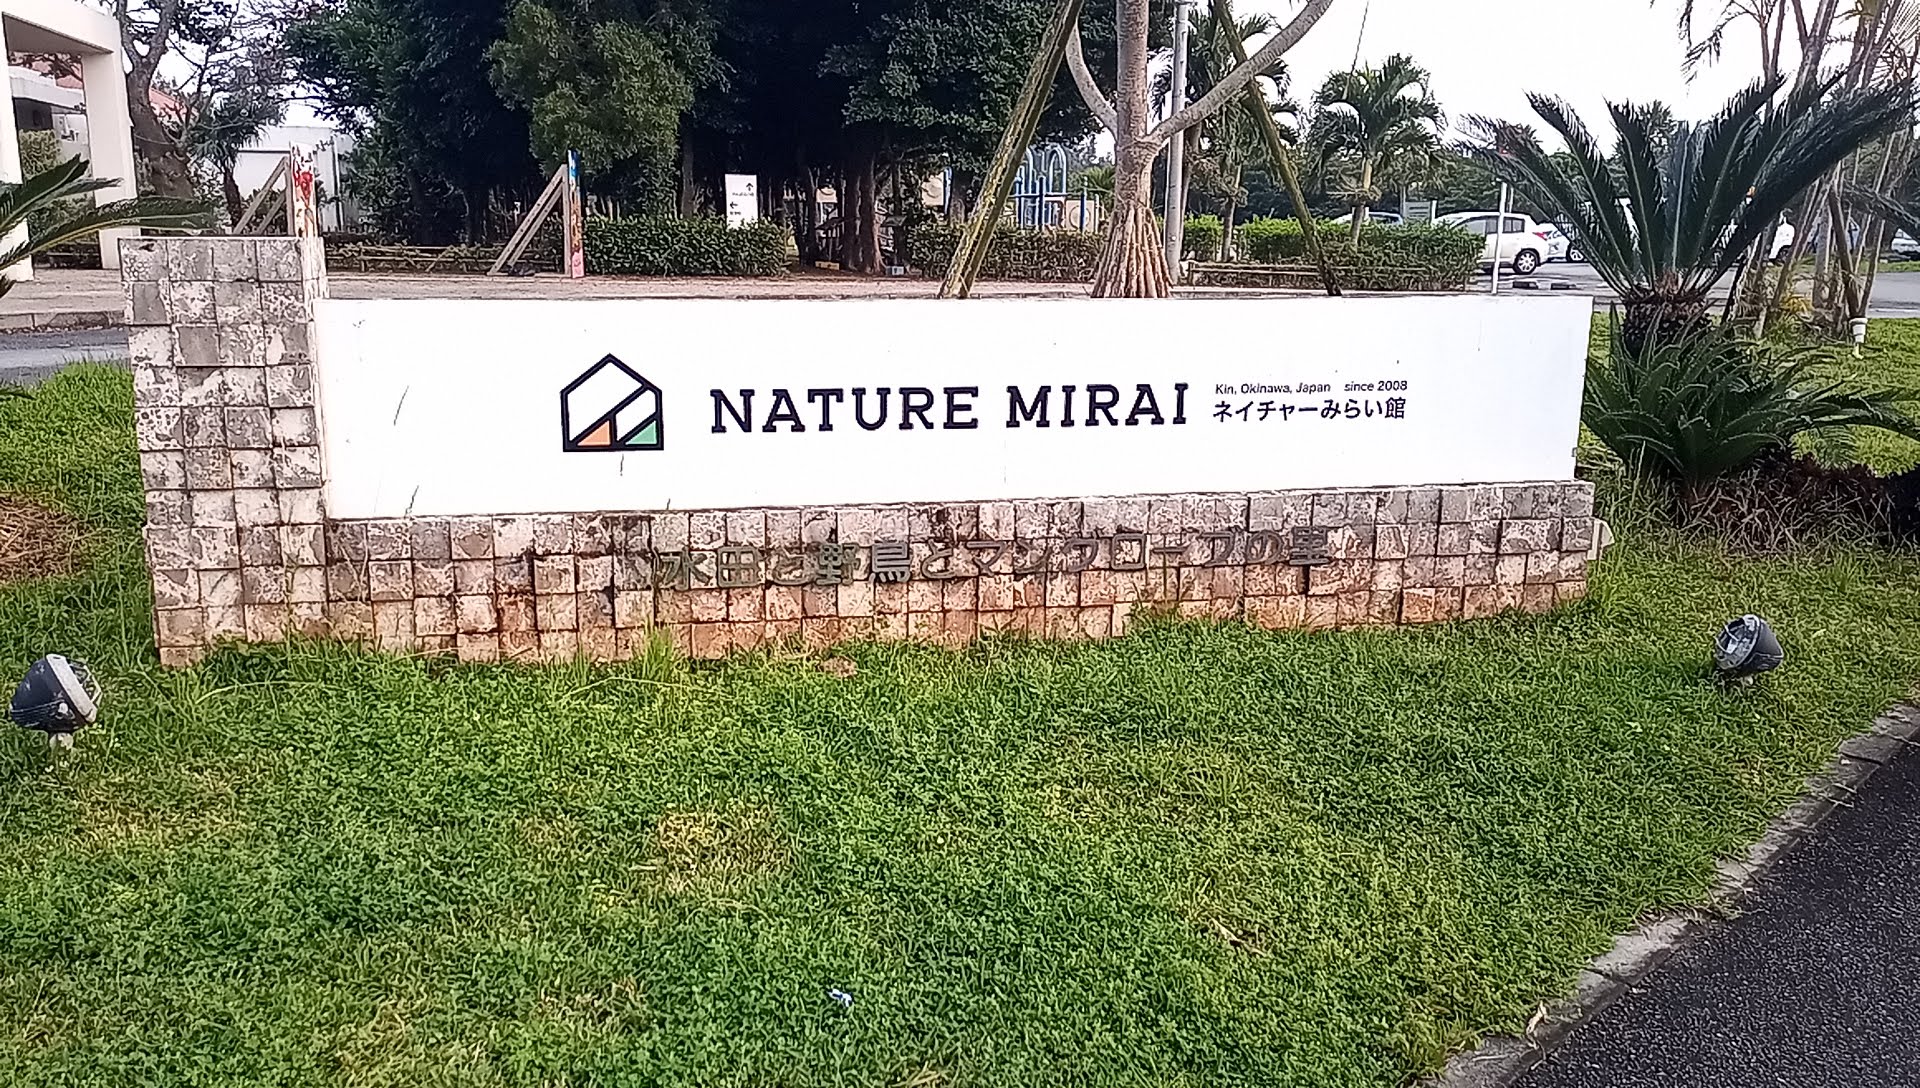 We went camping for the first time at Nature Mirai Kan in Kin Town!